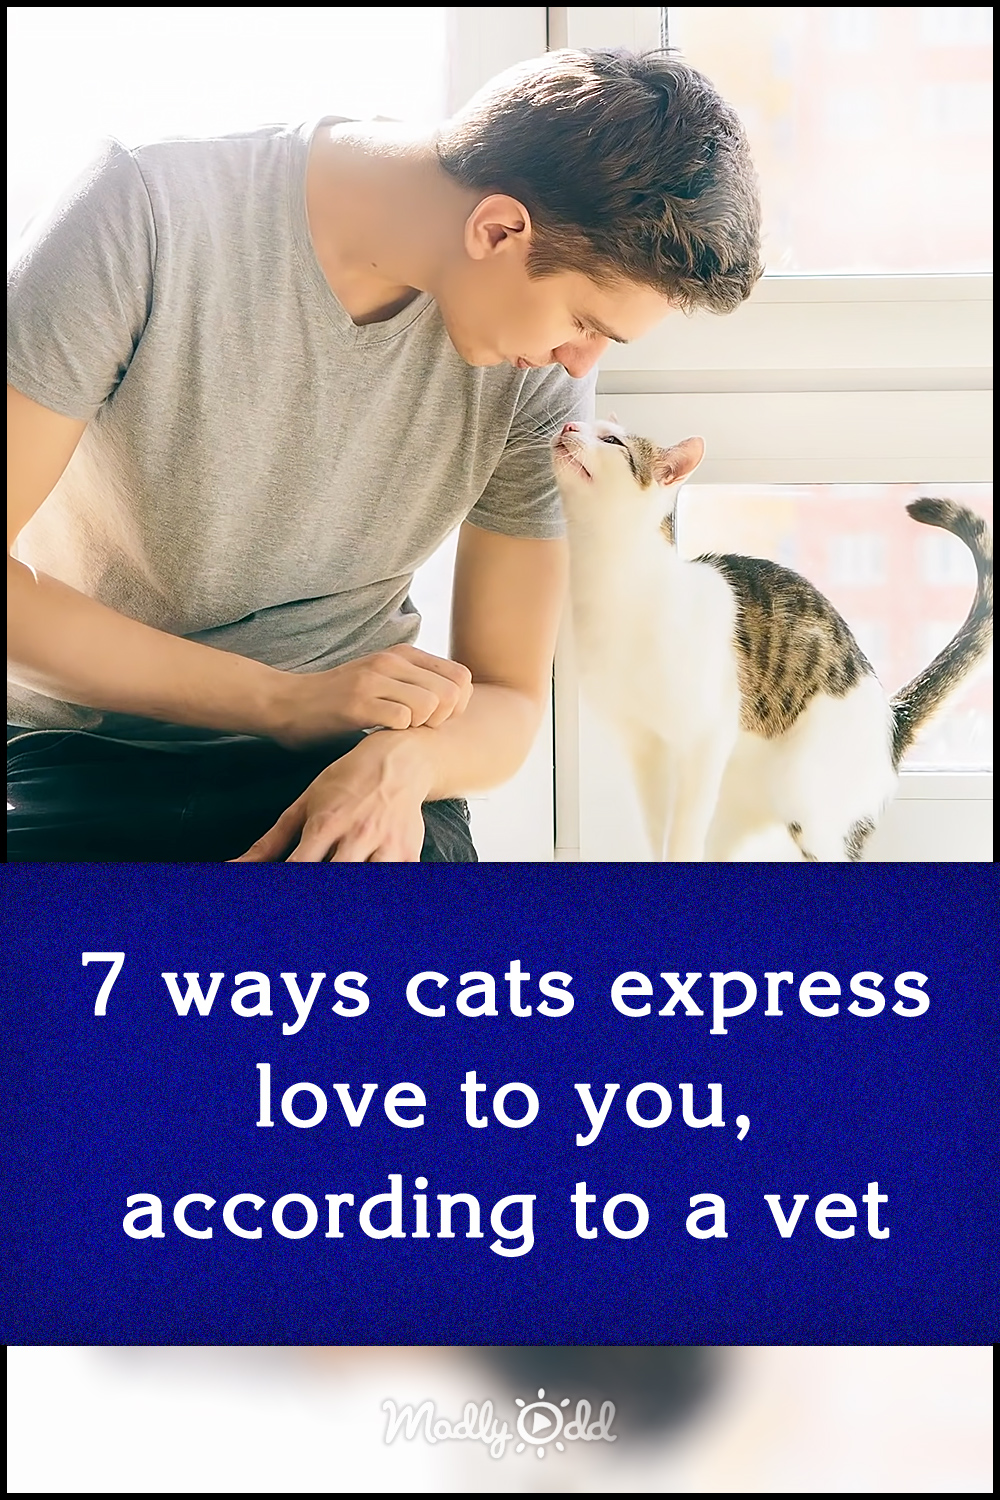 7 ways cats express love to you, according to a vet